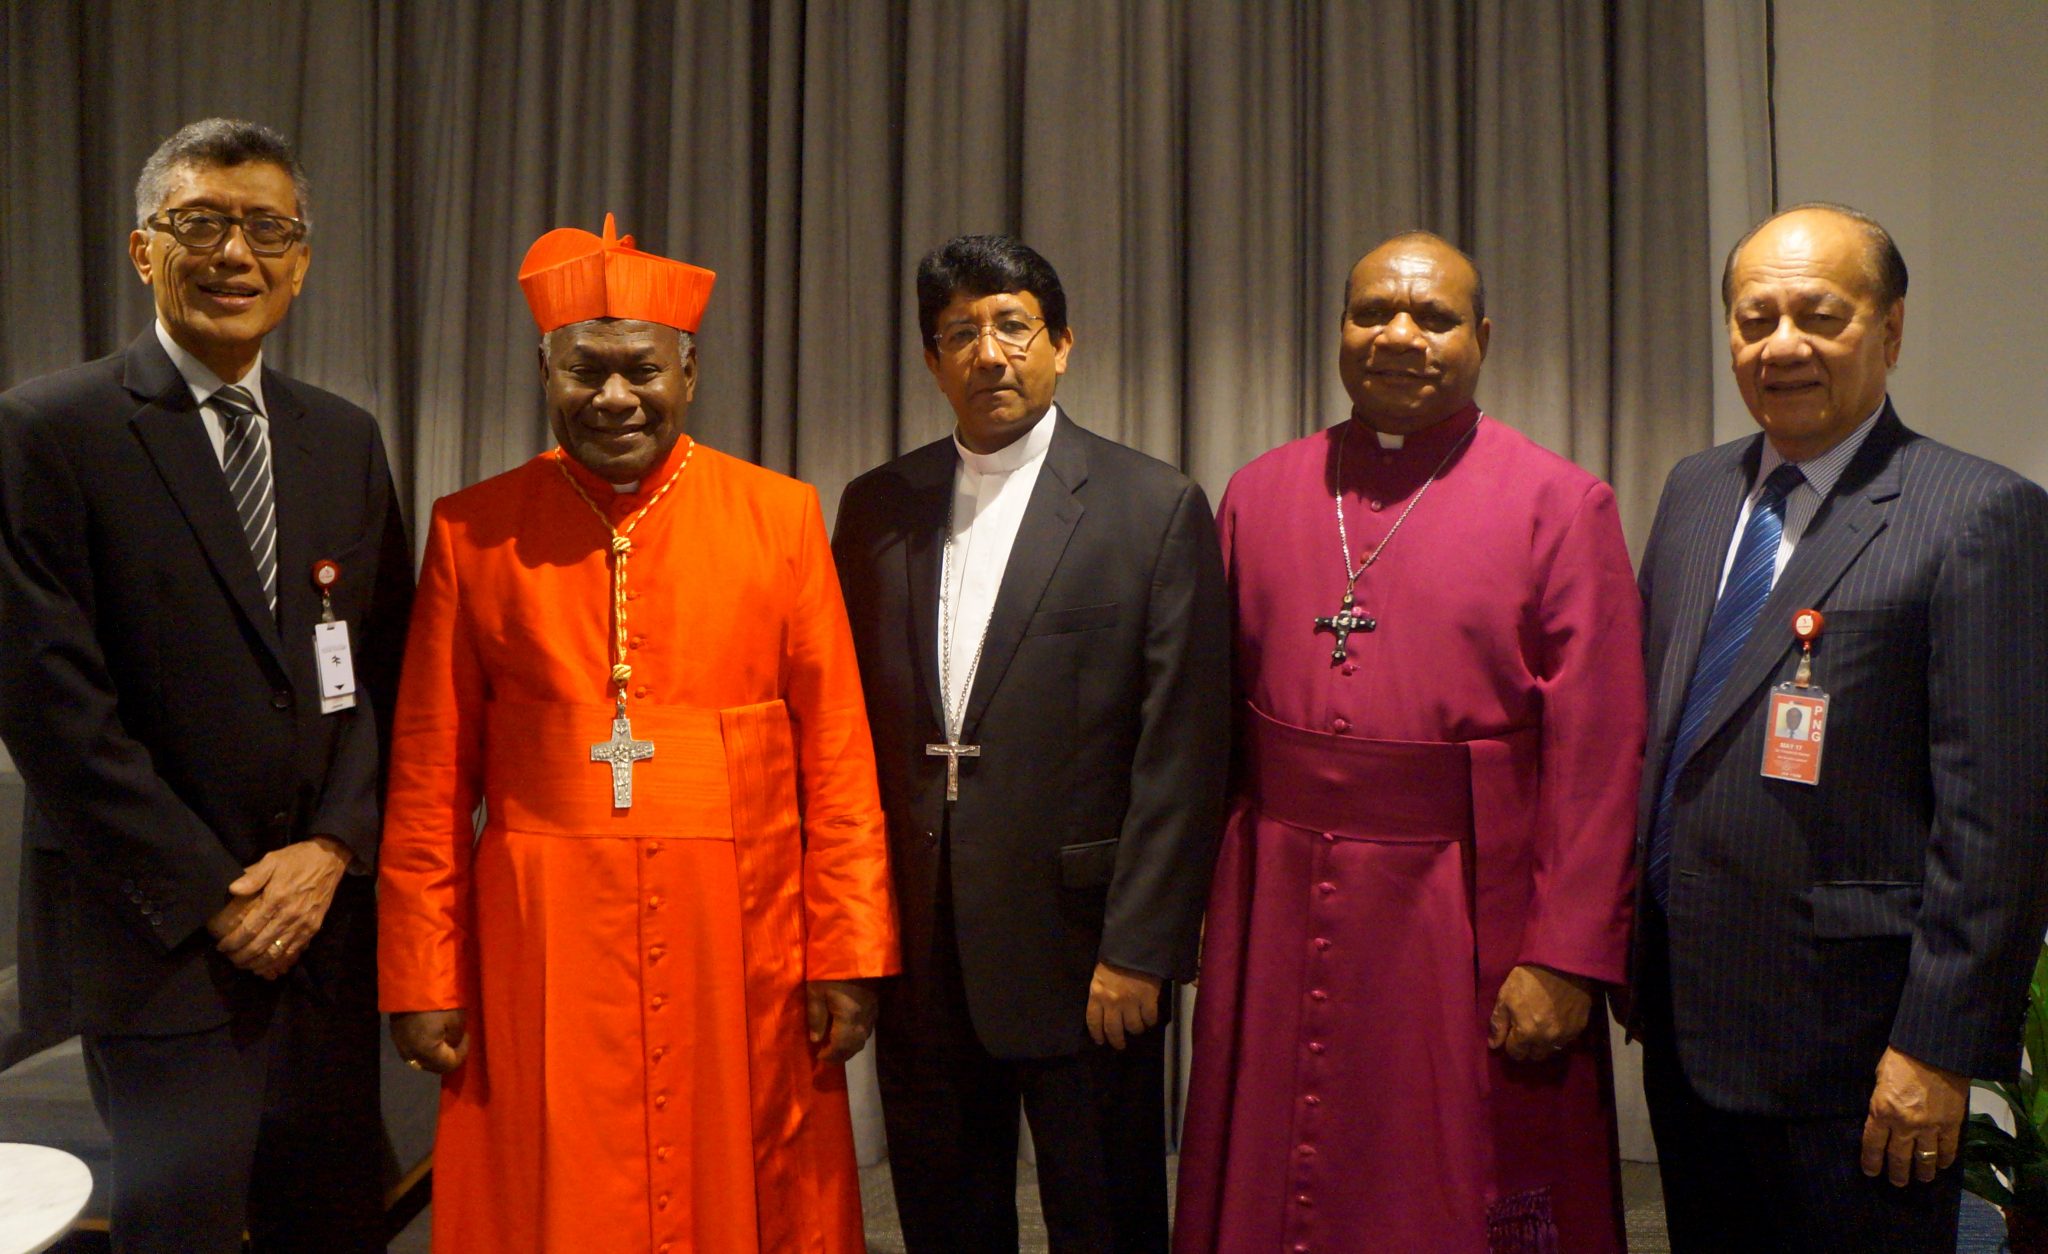 Cardinal’s arrival in Port Moresby